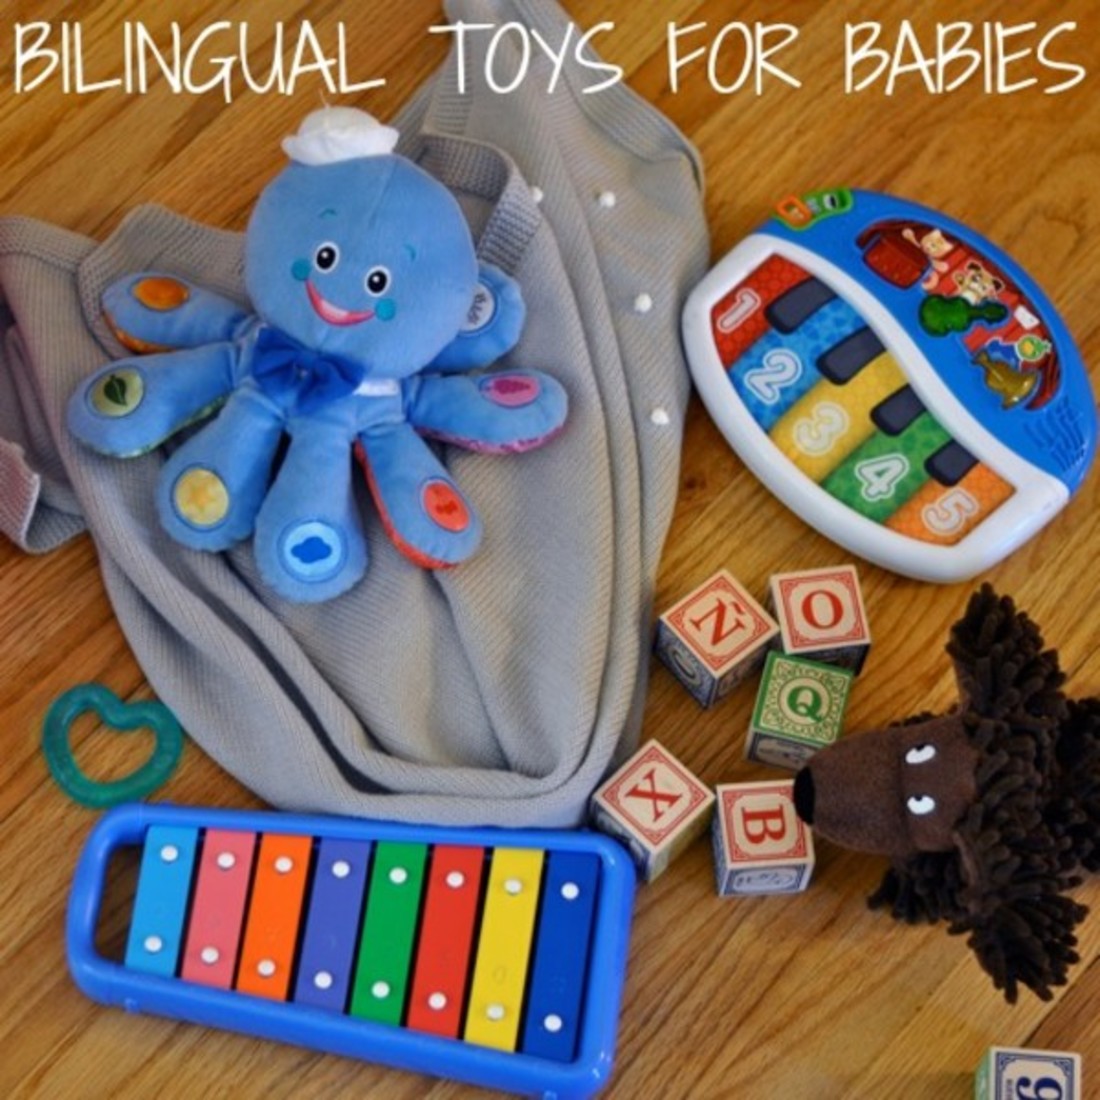 Baby's First Bilingual Toys | Mom.com